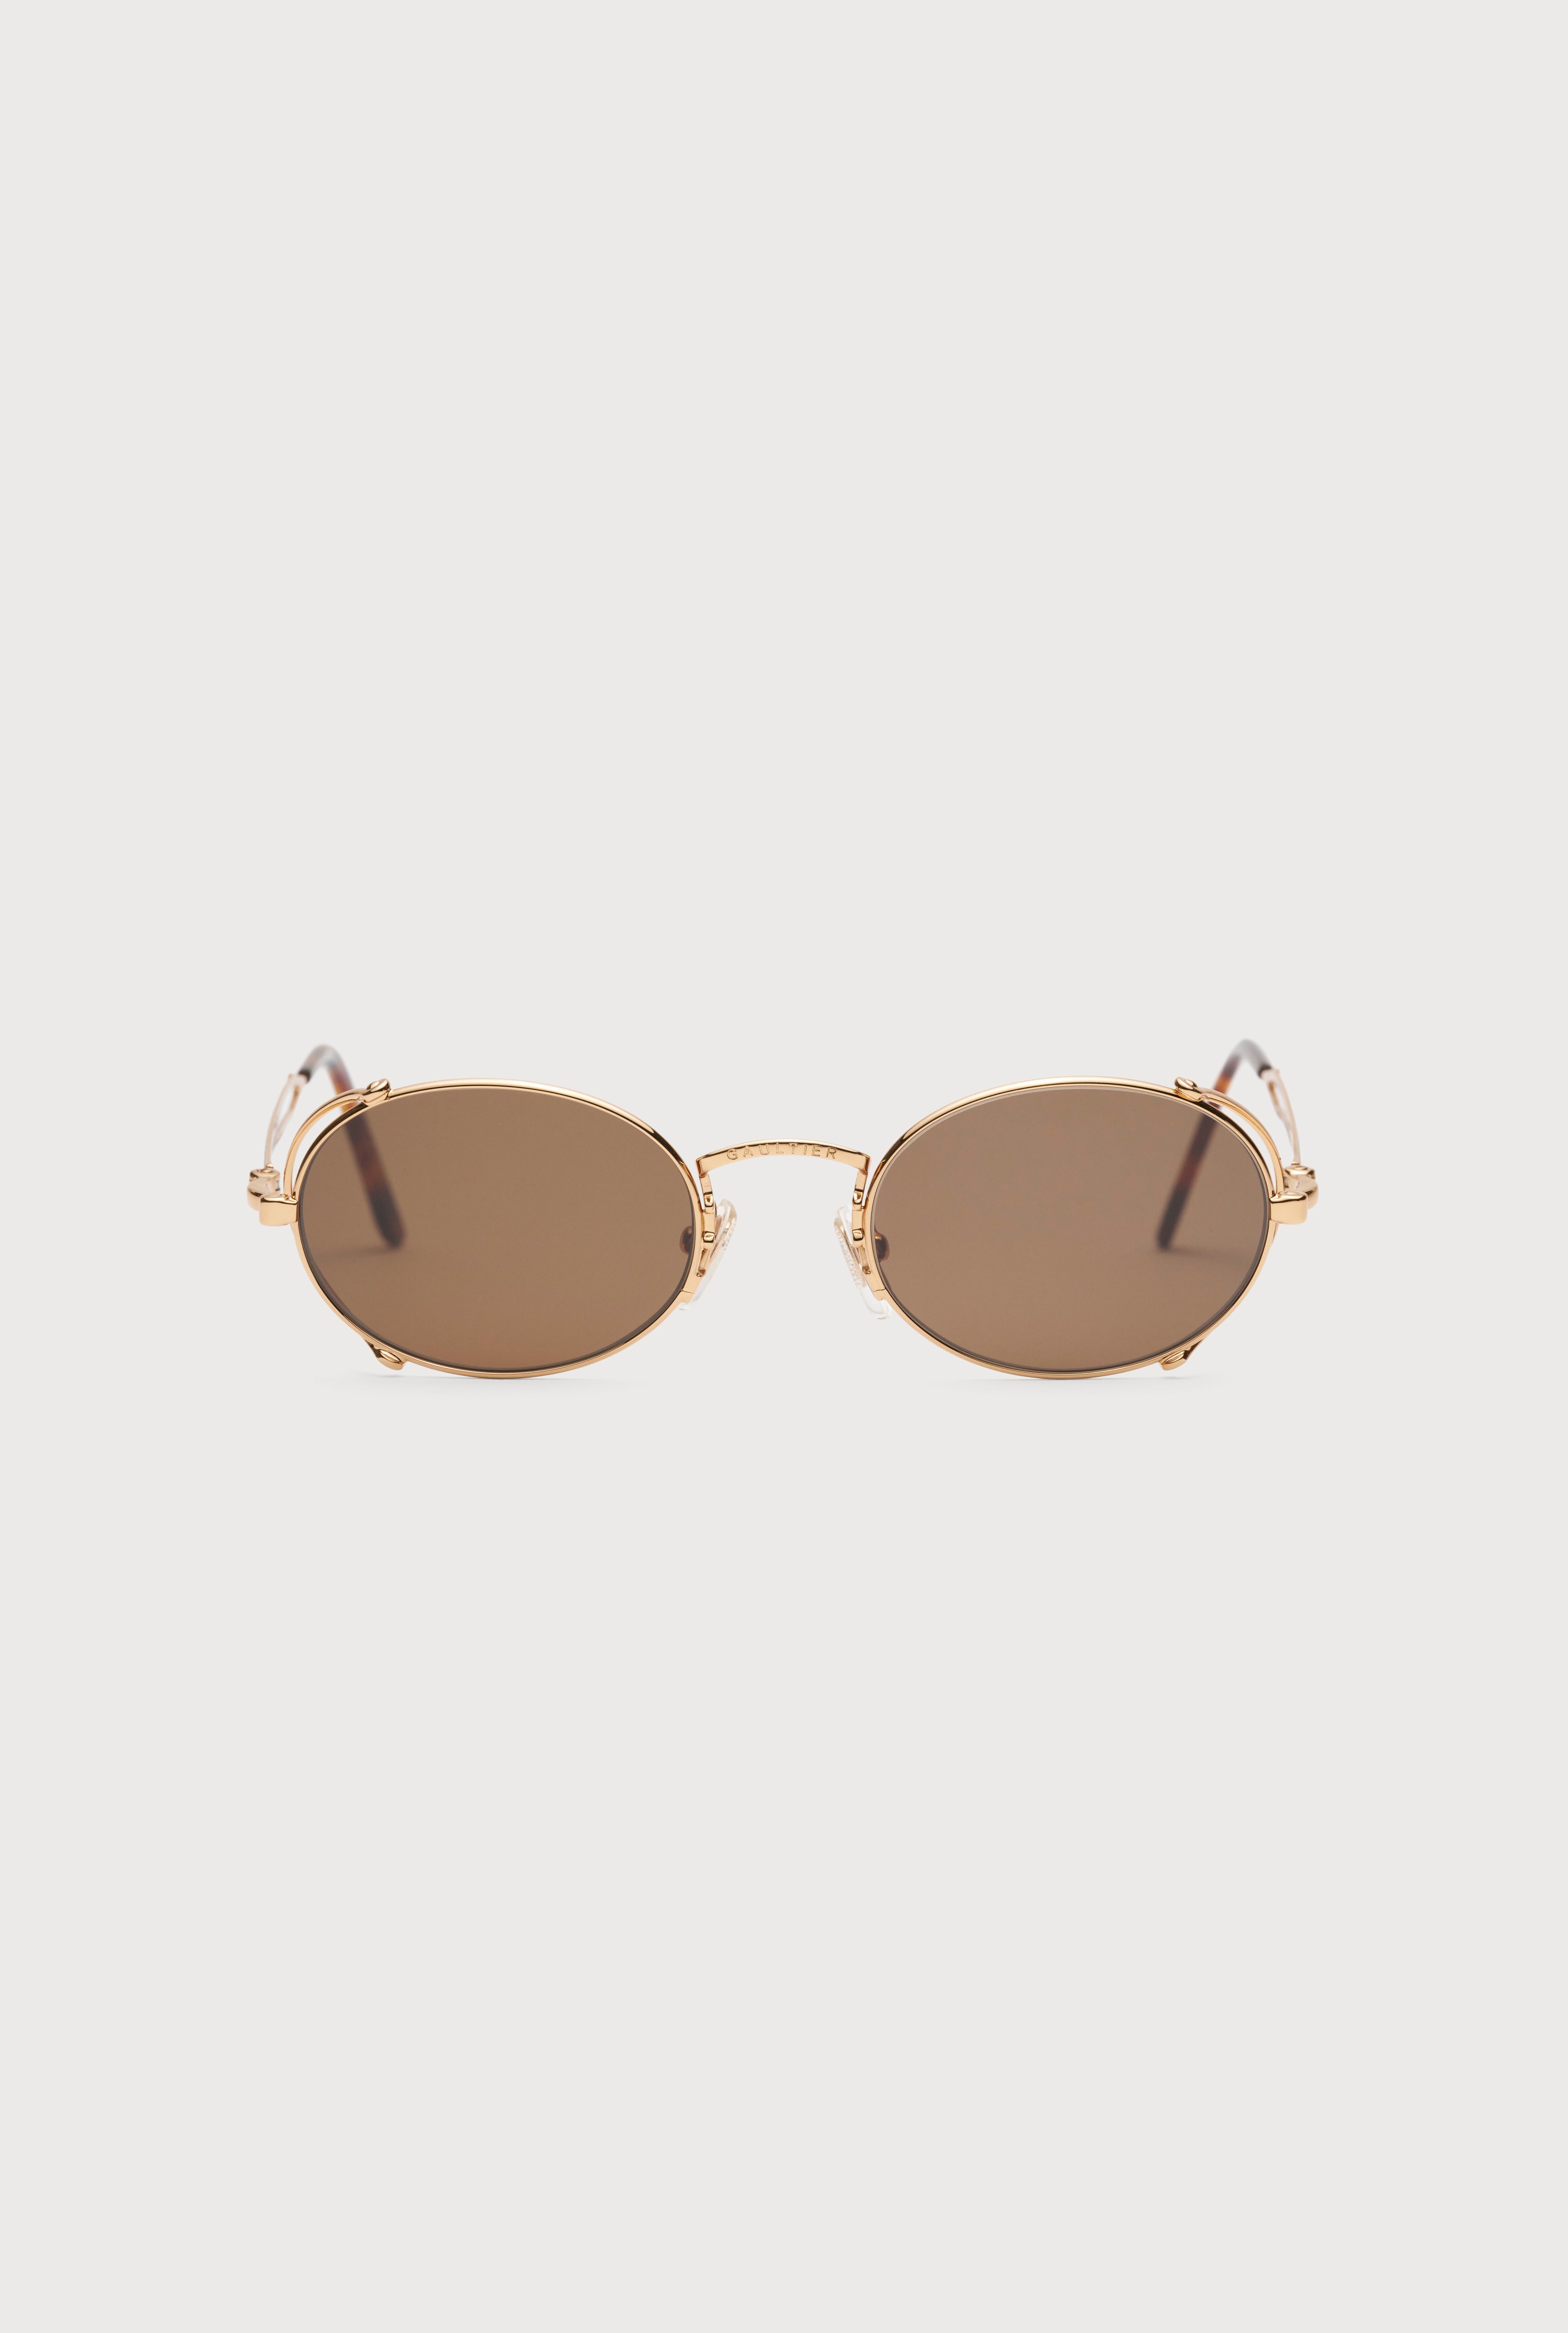 The Pink Gold 55-3175 Sunglasses